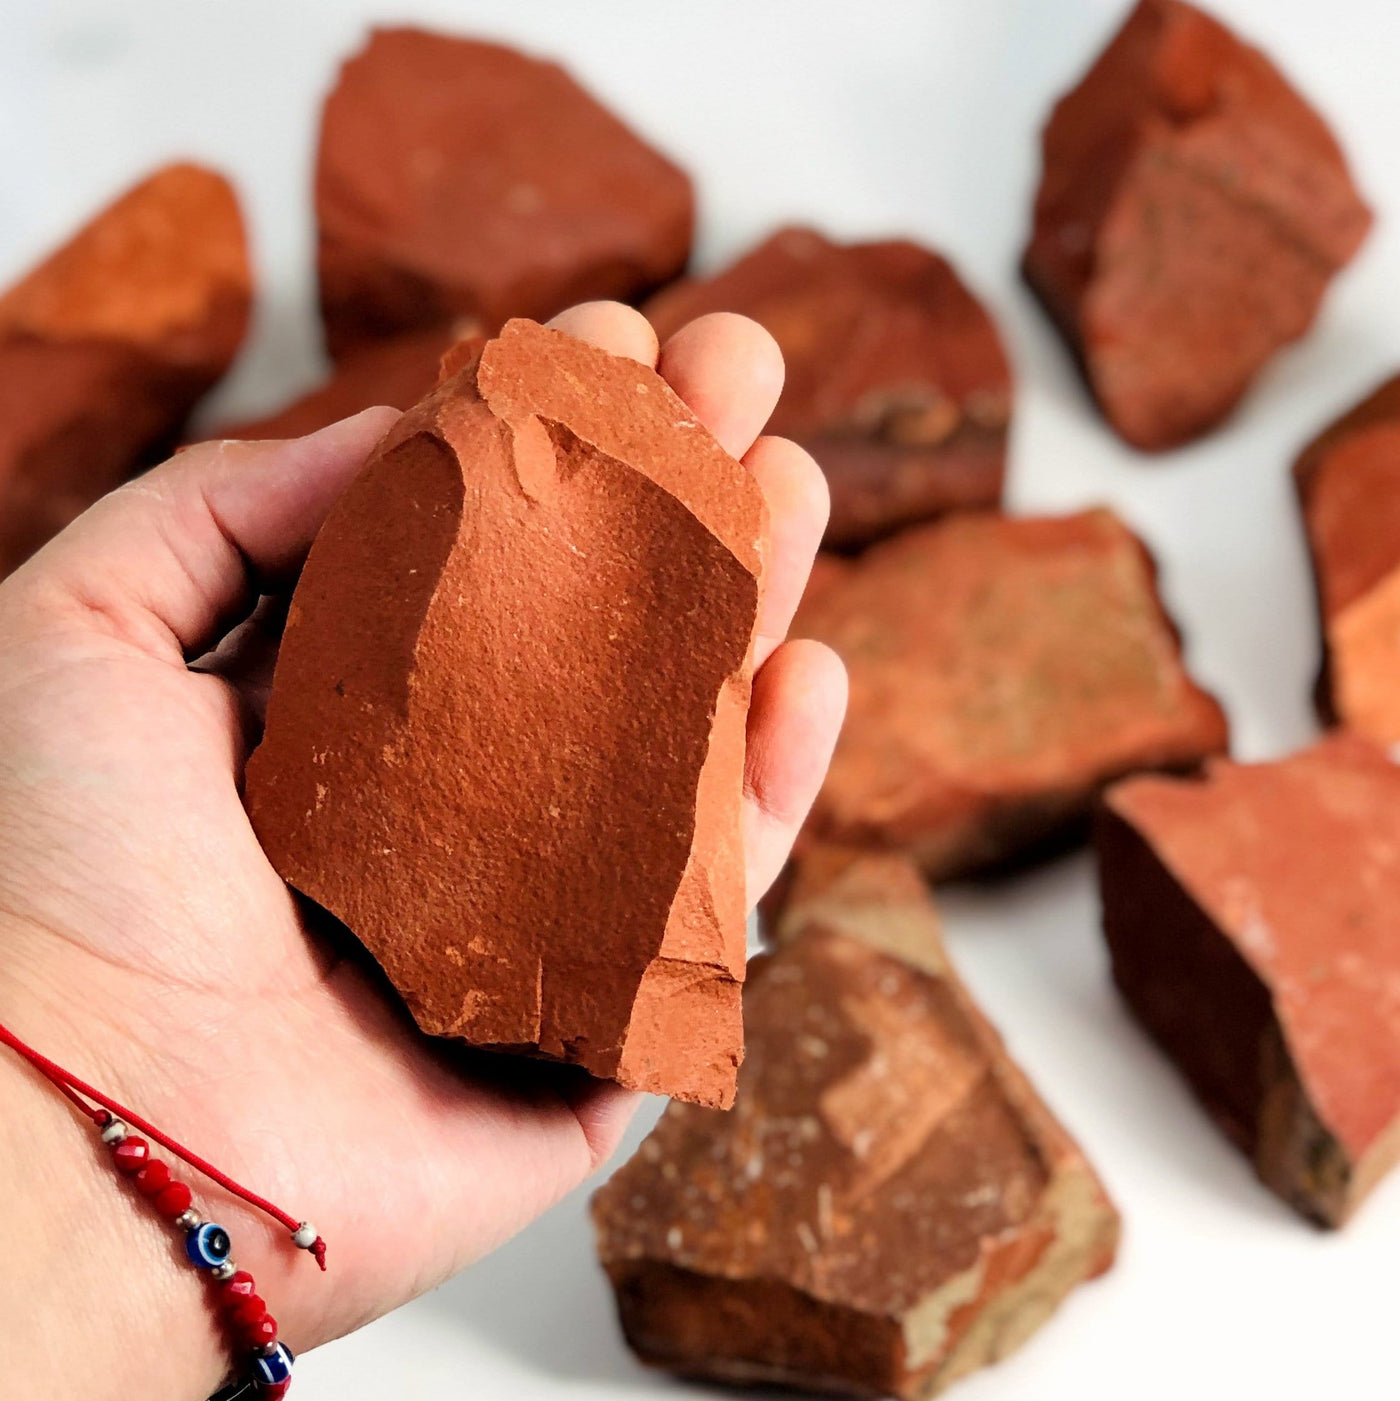 Hand holding up Red Jasper Rough Stone with others blurred in the background